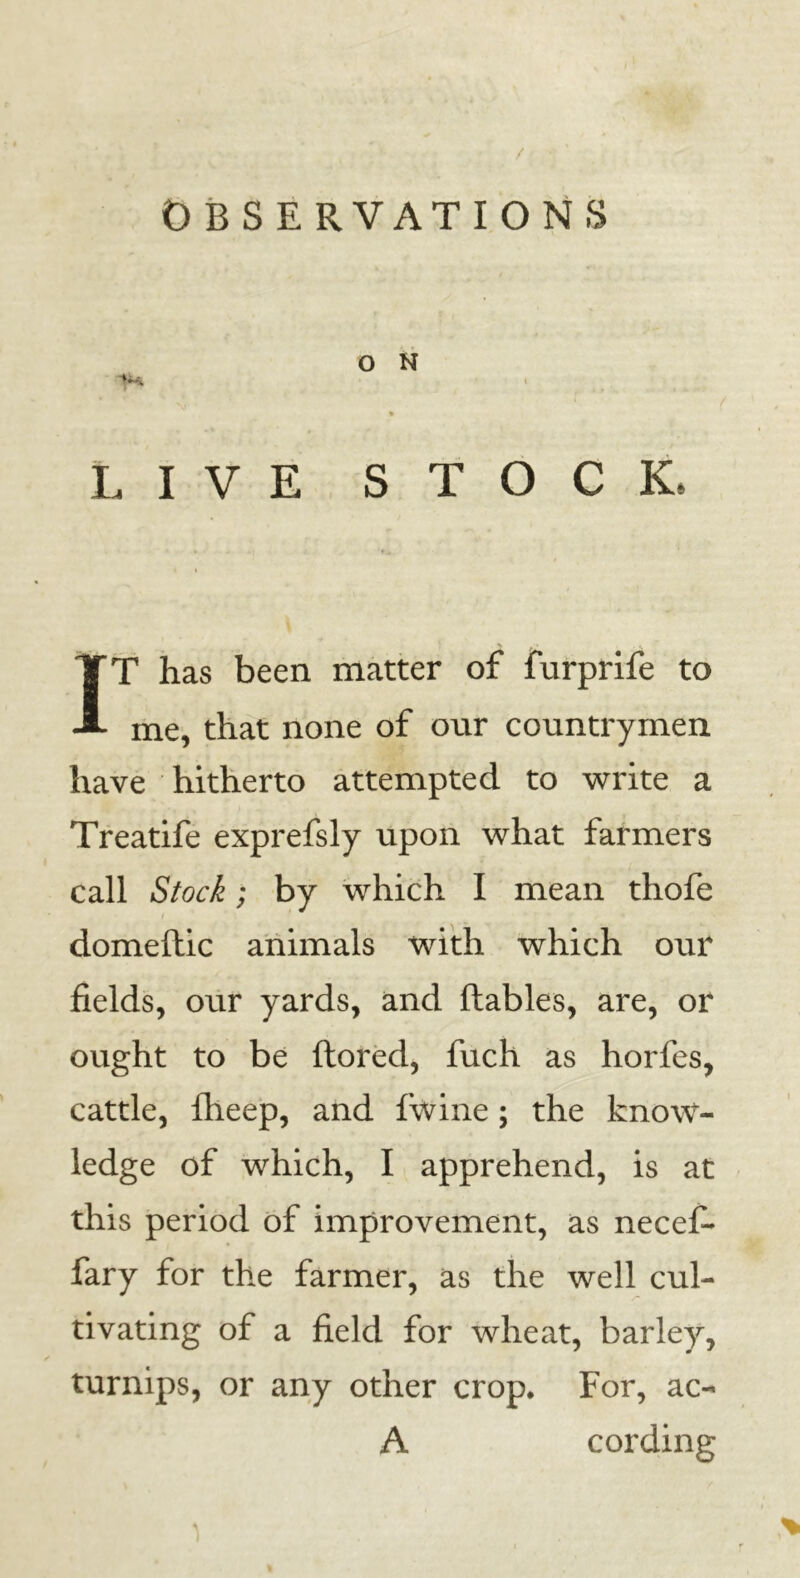 / OBSERVATIONS O N ^S, i LIVE STOCK, IT has been matter of furprife to me, that none of our countrymen have hitherto attempted to write a Treatife exprefsly upon what farmers call Stock; by which I mean thofe domeftic animals with which our fields, our yards, and flables, are, or ought to be ftored, fuch as horfes, cattle, flieep, and fwine; the know- ledge of which, I apprehend, is at this period of improvement, as necefi* fary for the farmer, as the well cul- tivating of a field for wheat, barley, turnips, or any other crop. For, ac- A cording )